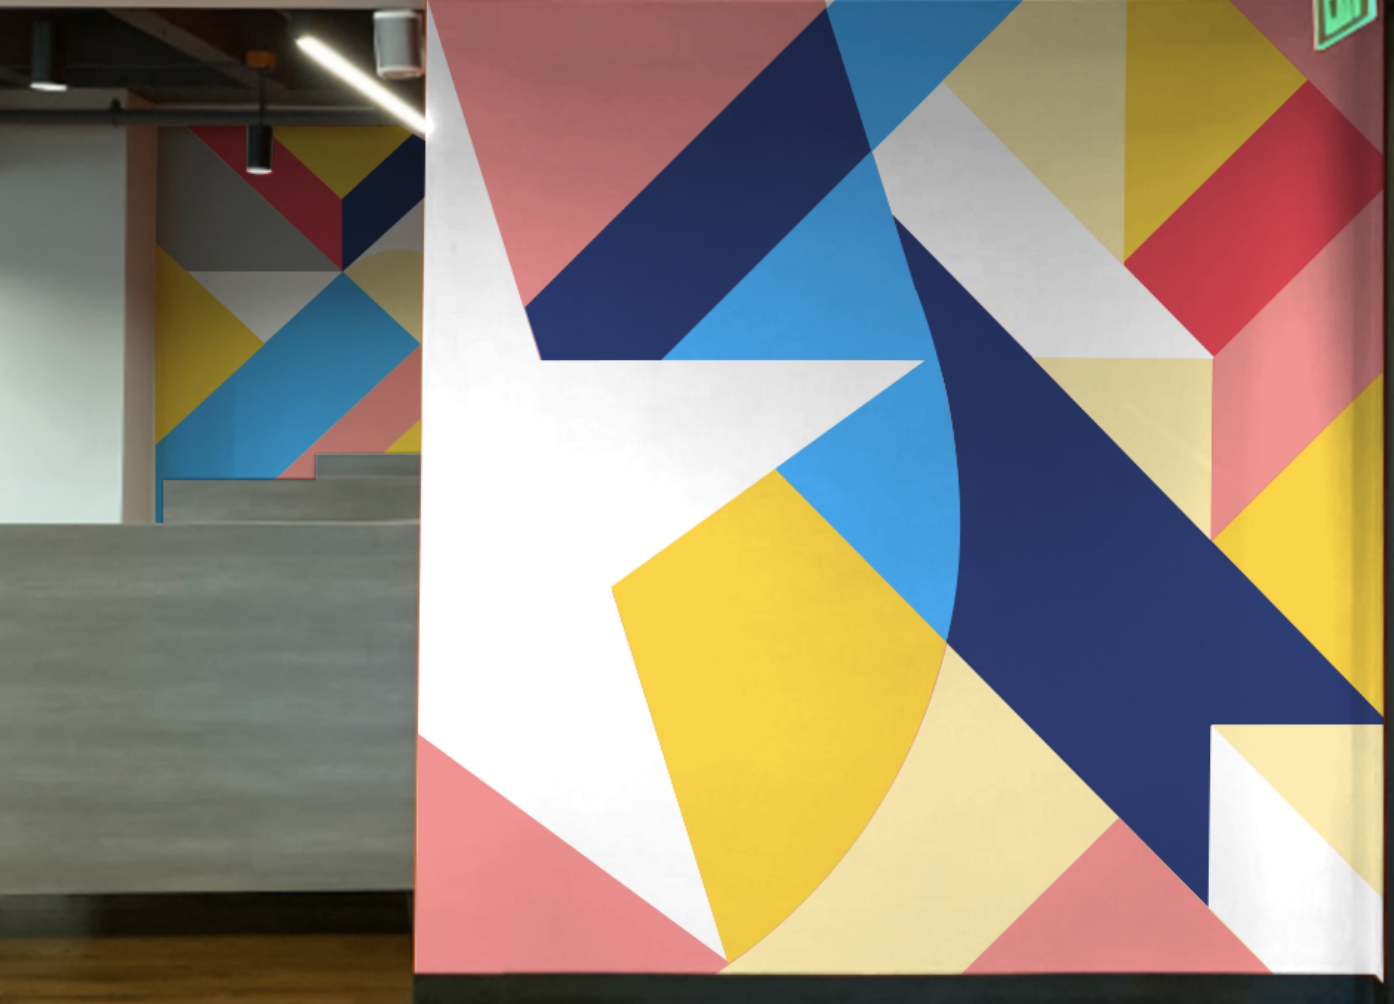 A mural in Auth0's Bellevue, Washington office designed and painted by an employee